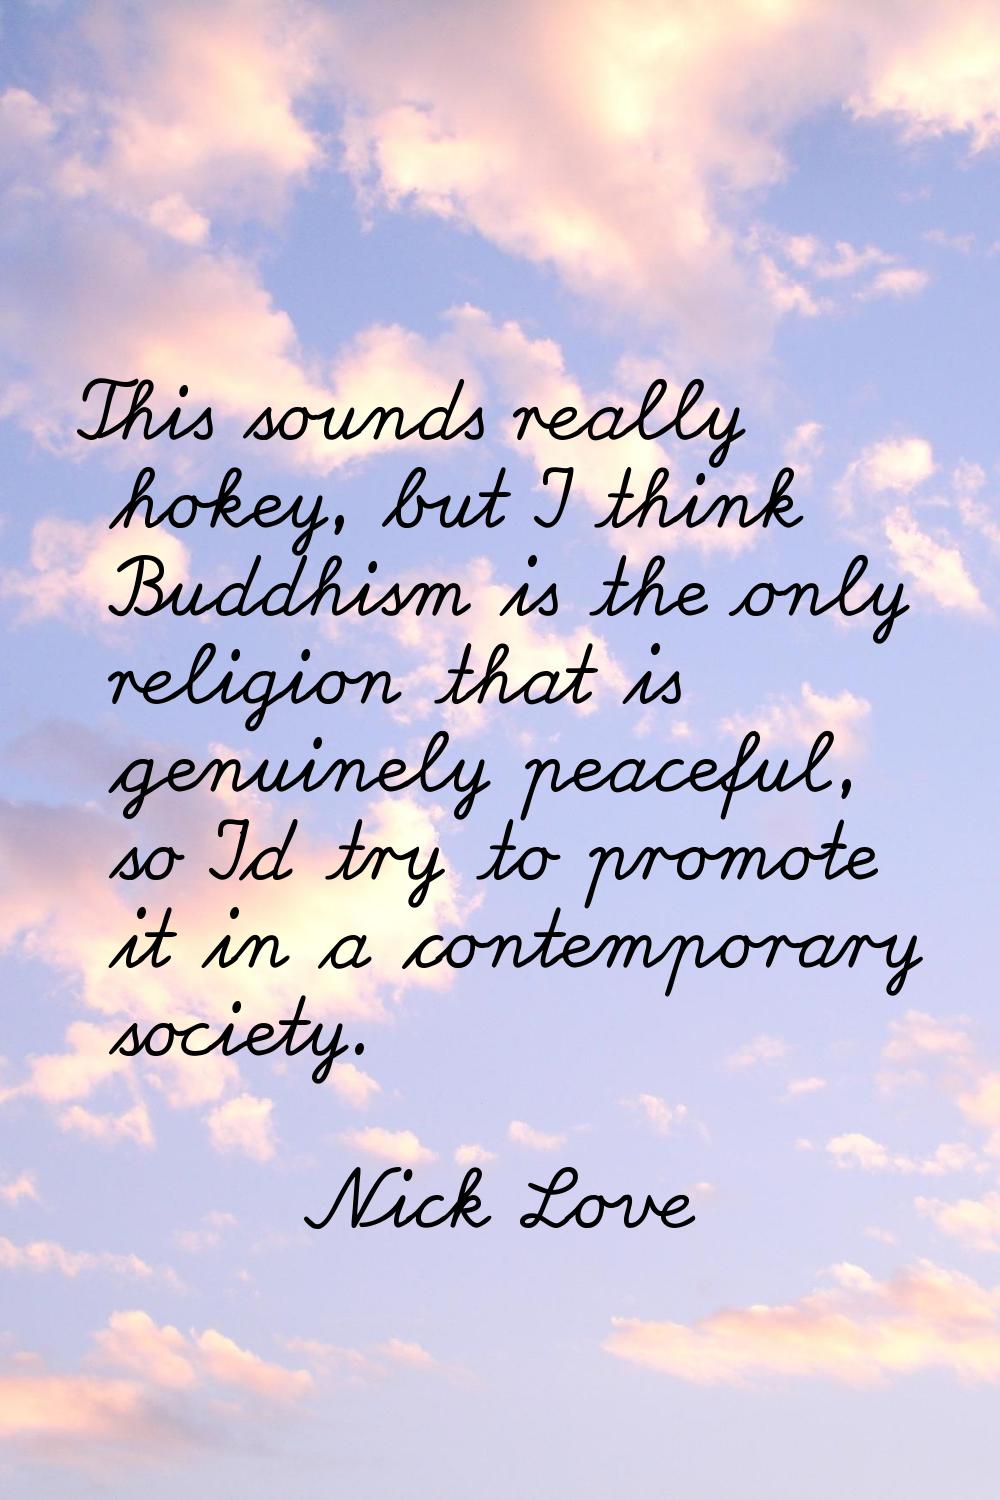 This sounds really hokey, but I think Buddhism is the only religion that is genuinely peaceful, so 